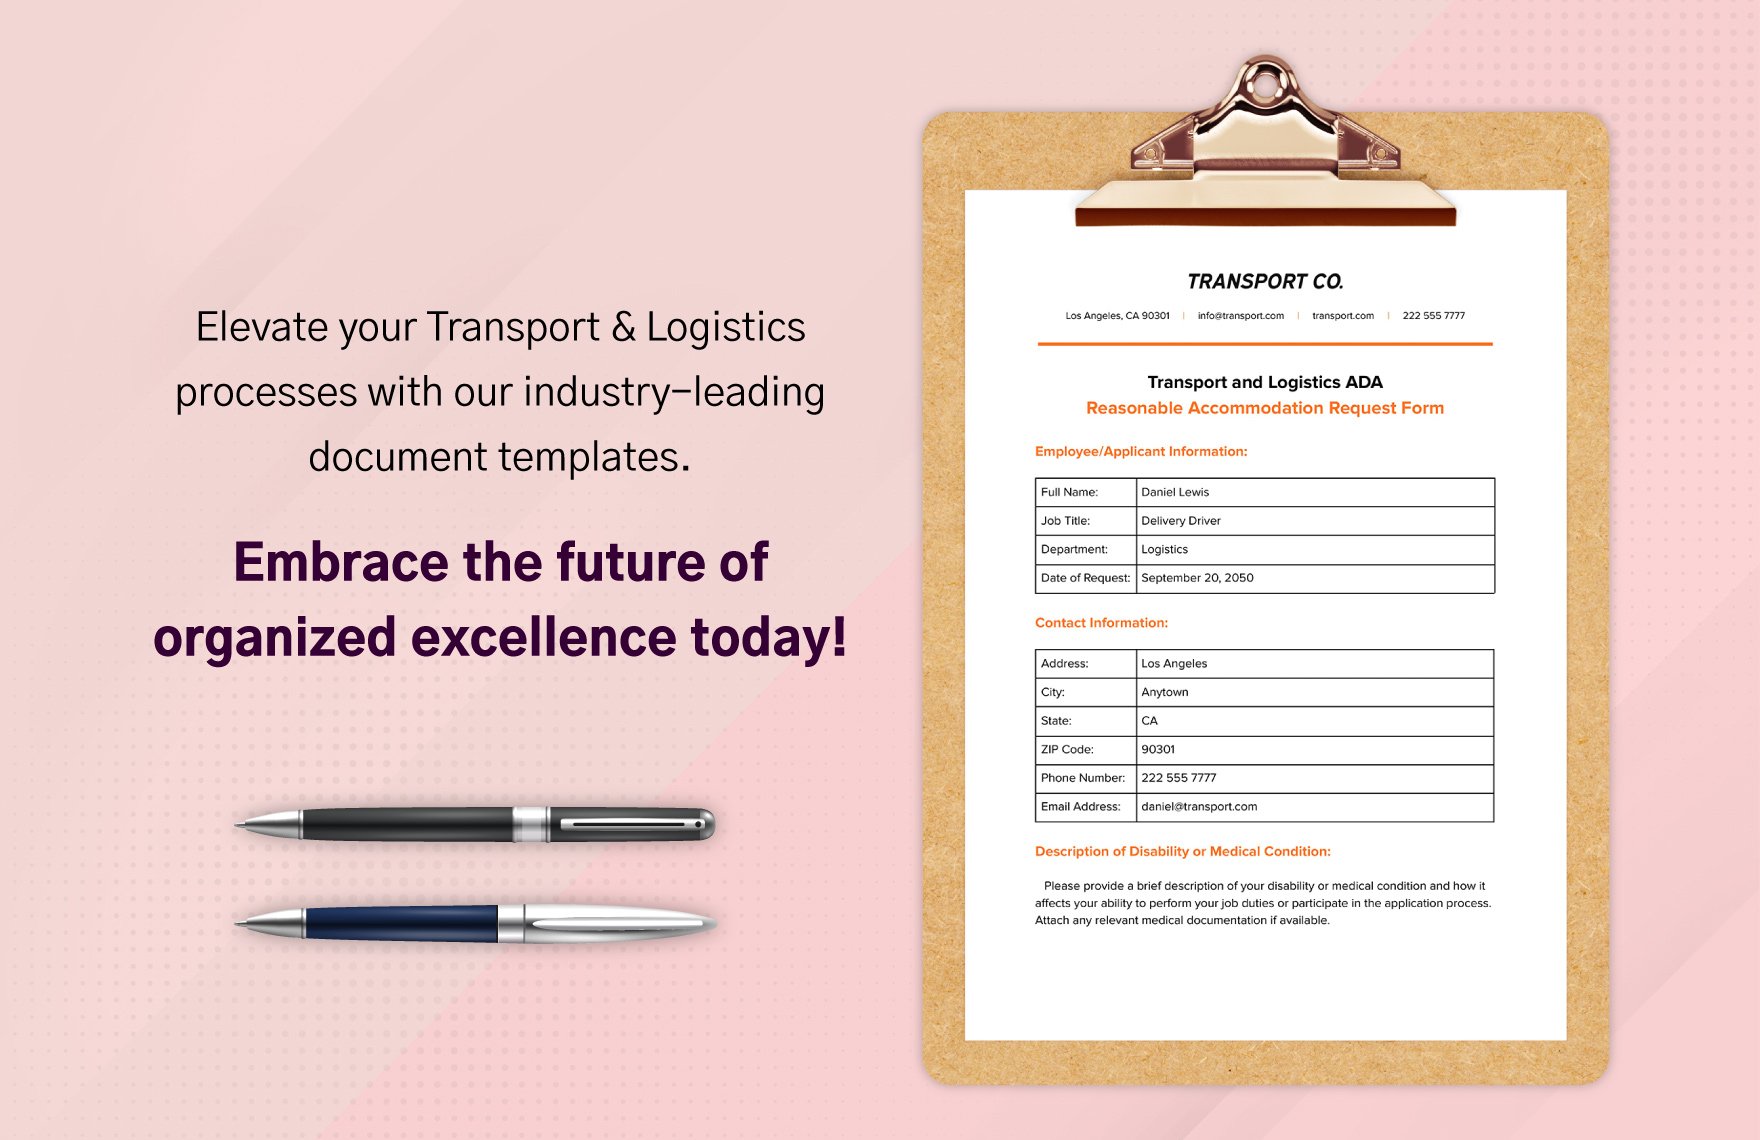 Transport and Logistics ADA Reasonable Accommodation Request Form Template